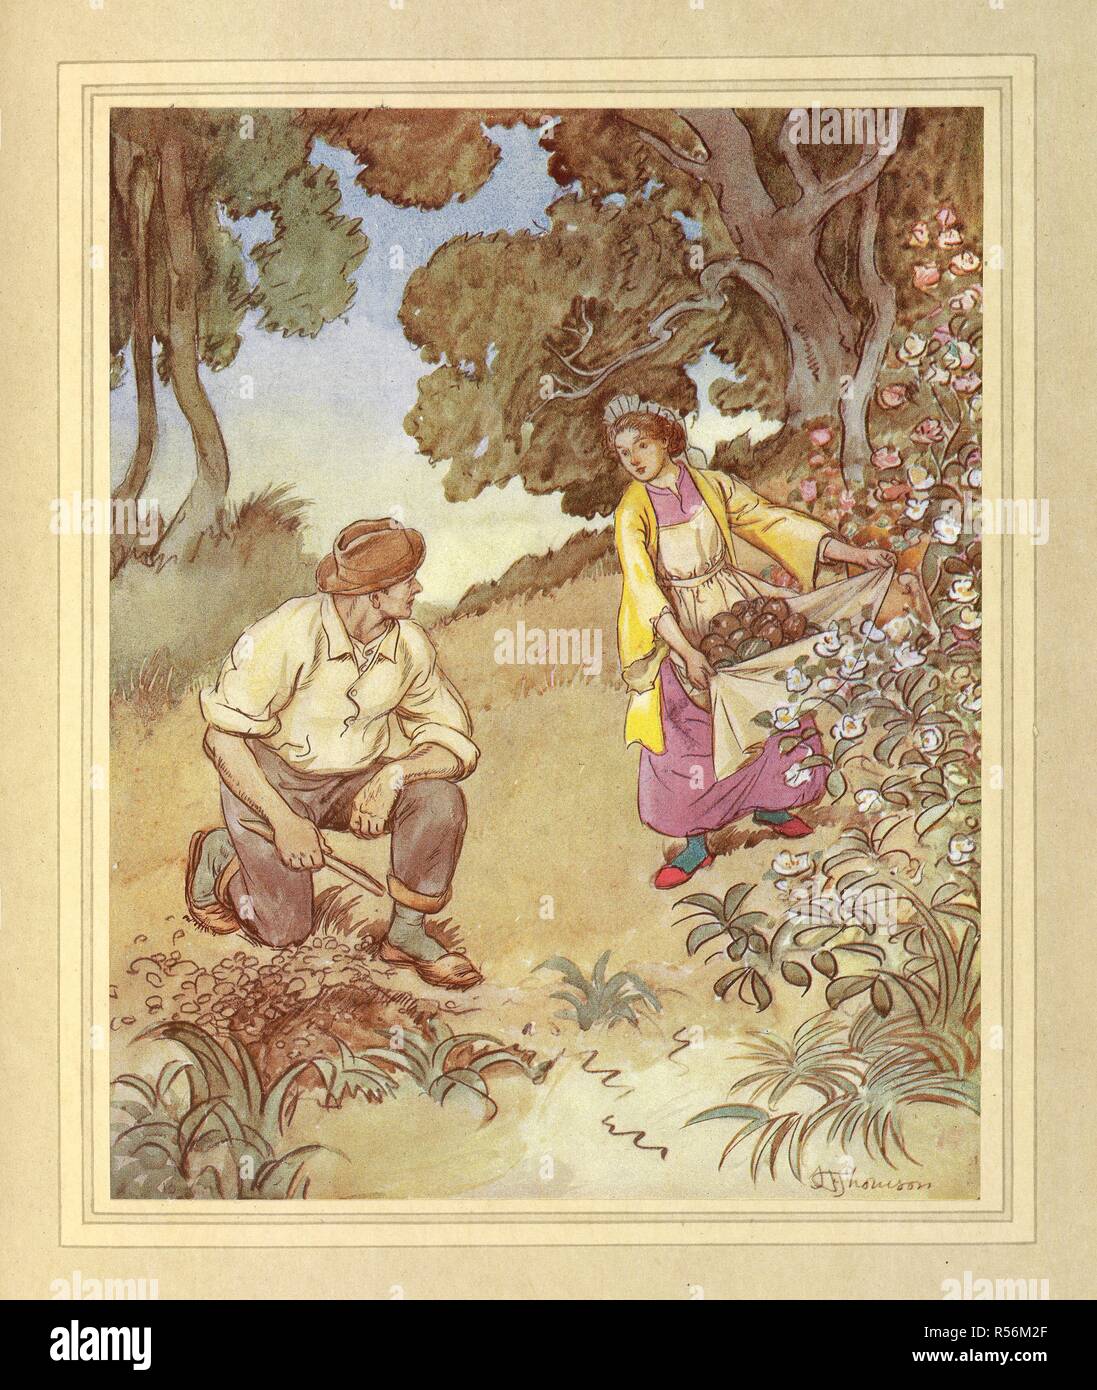 On the island. A man digging a hole, a woman collecting fruit. The Admirable Crichton ... Illustrated by Hugh Thomson. Hodder & Stoughton: London, [1914.]. Source: K.T.C.102.b.3, page 80. Language: English. Stock Photo